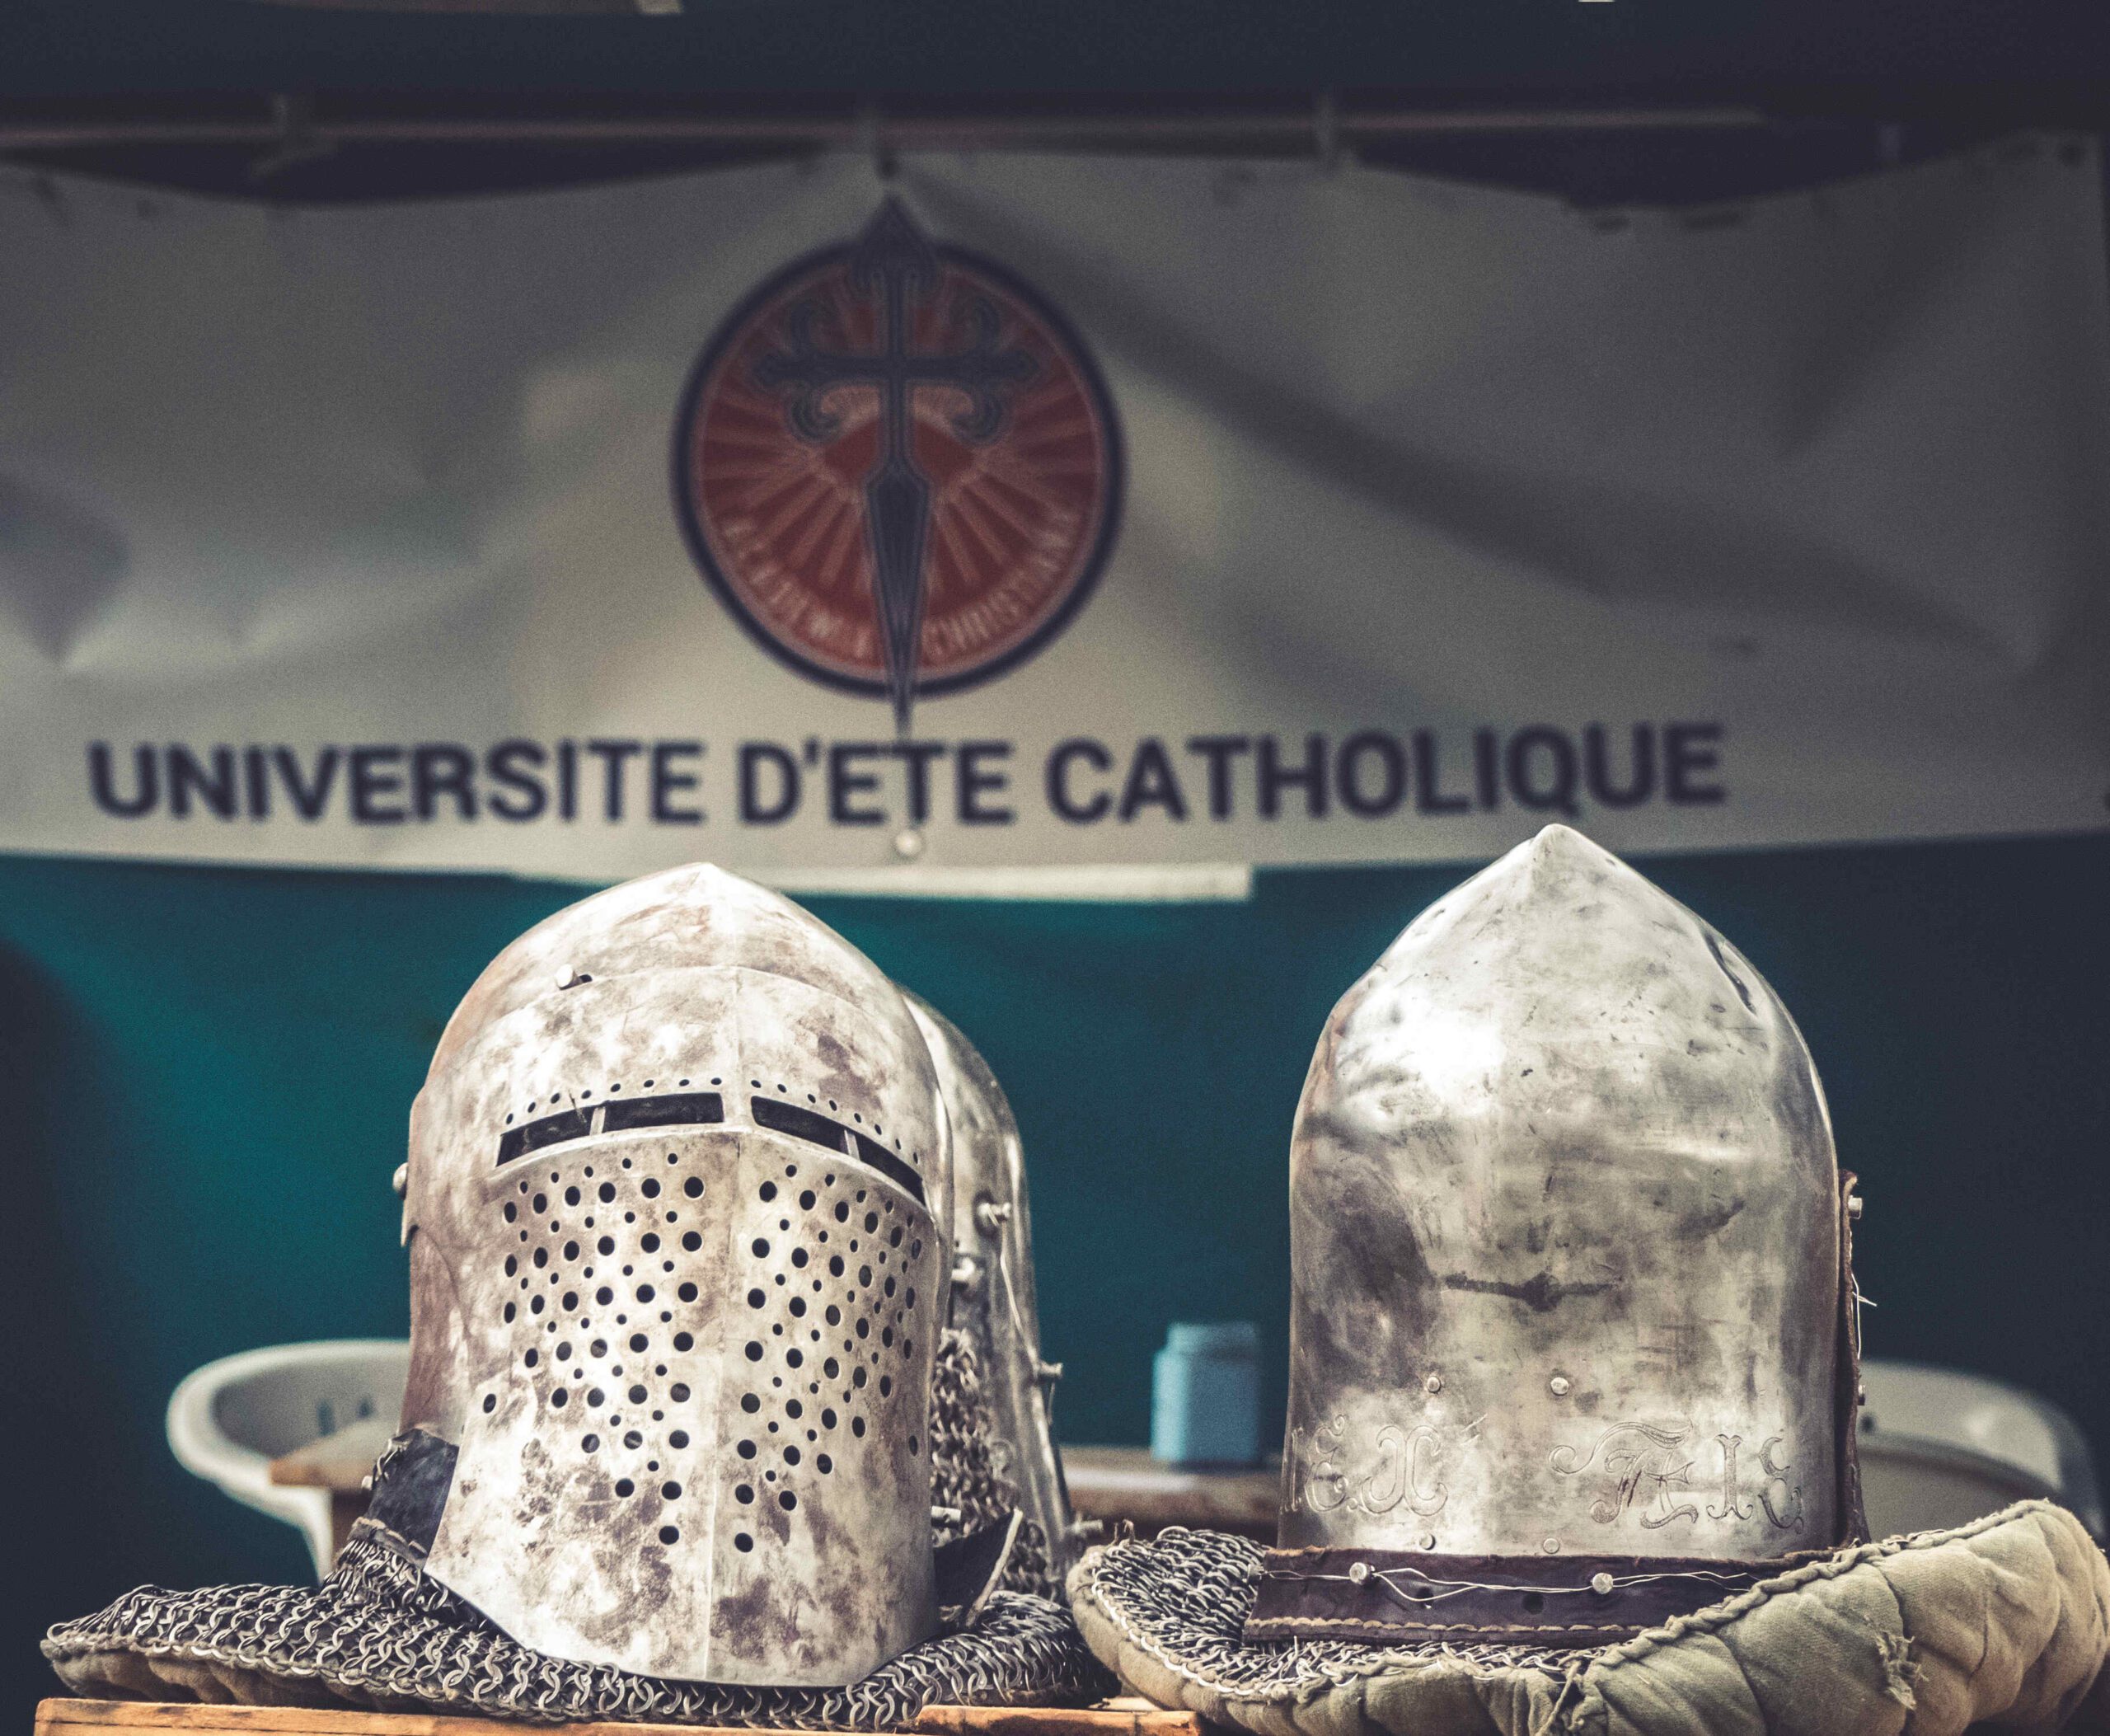 Academia Christiana: a Marriage of the Catholic and the Extreme Right